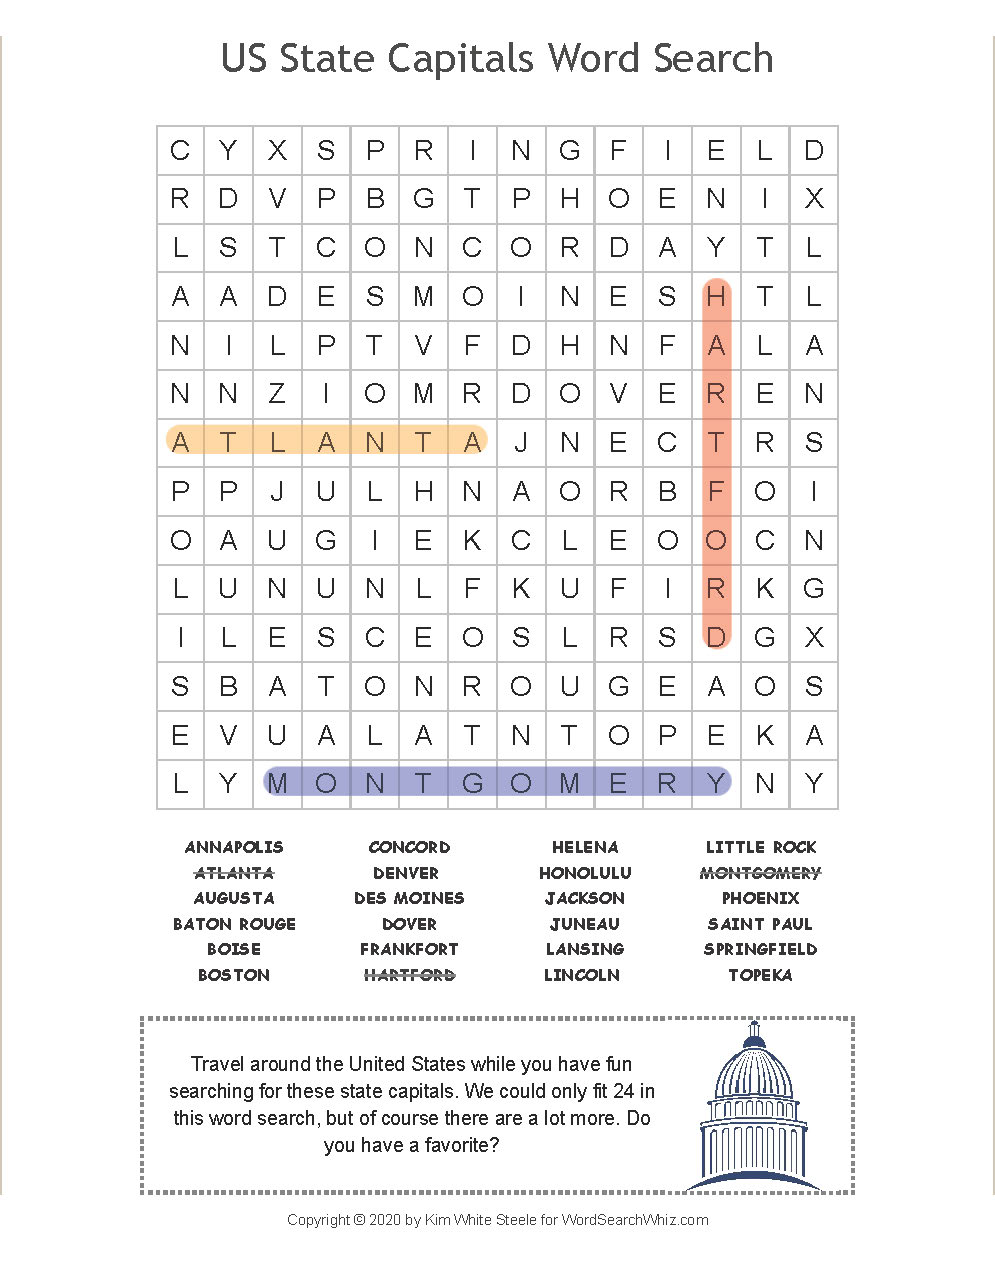 14-challenging-50-states-word-searches-kittybabylovecom-united-states